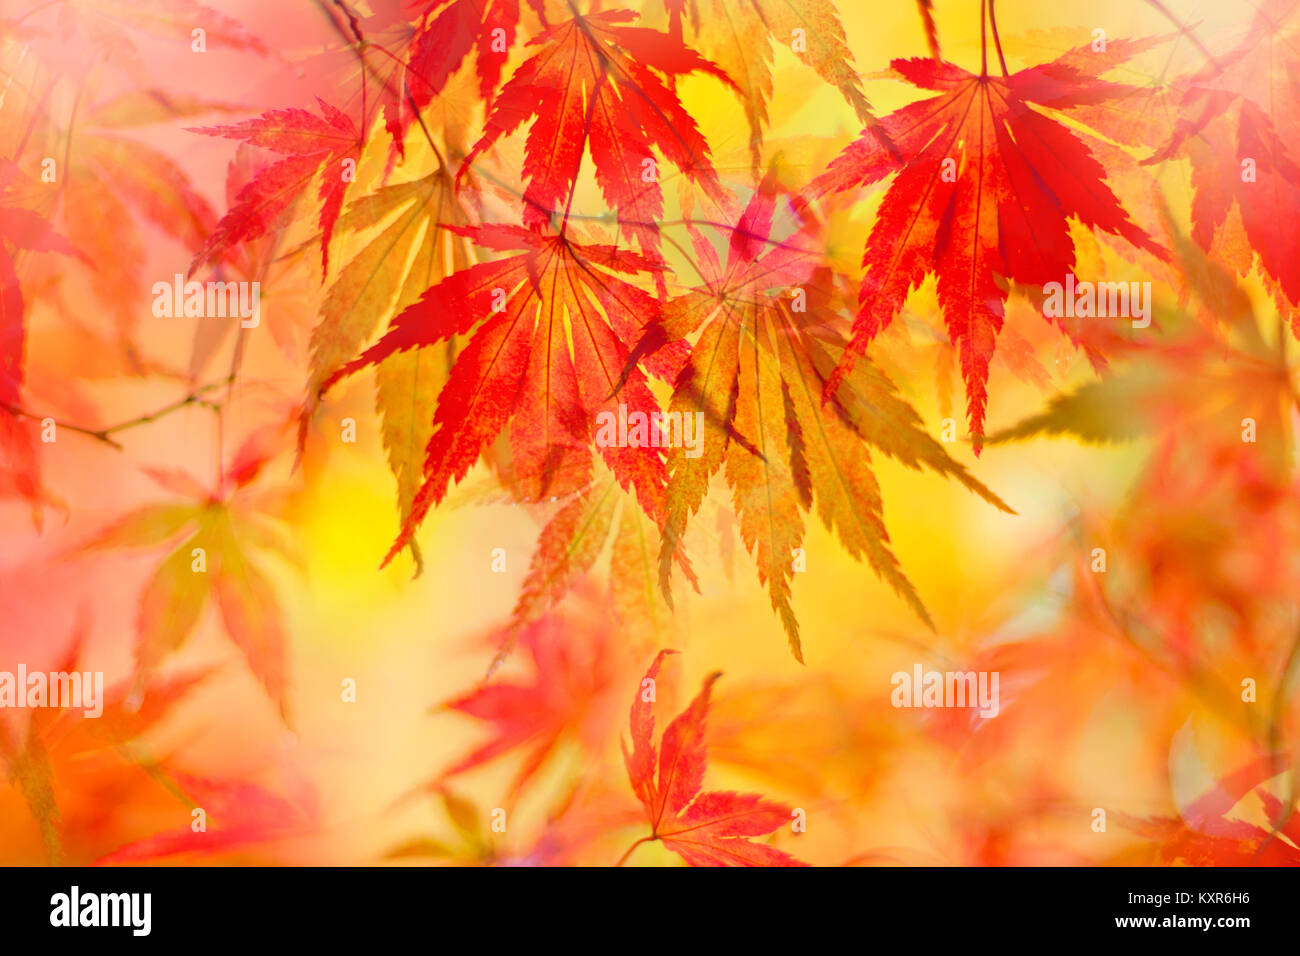 Vibrant red and yellow Autumn Acer leaves Stock Photo